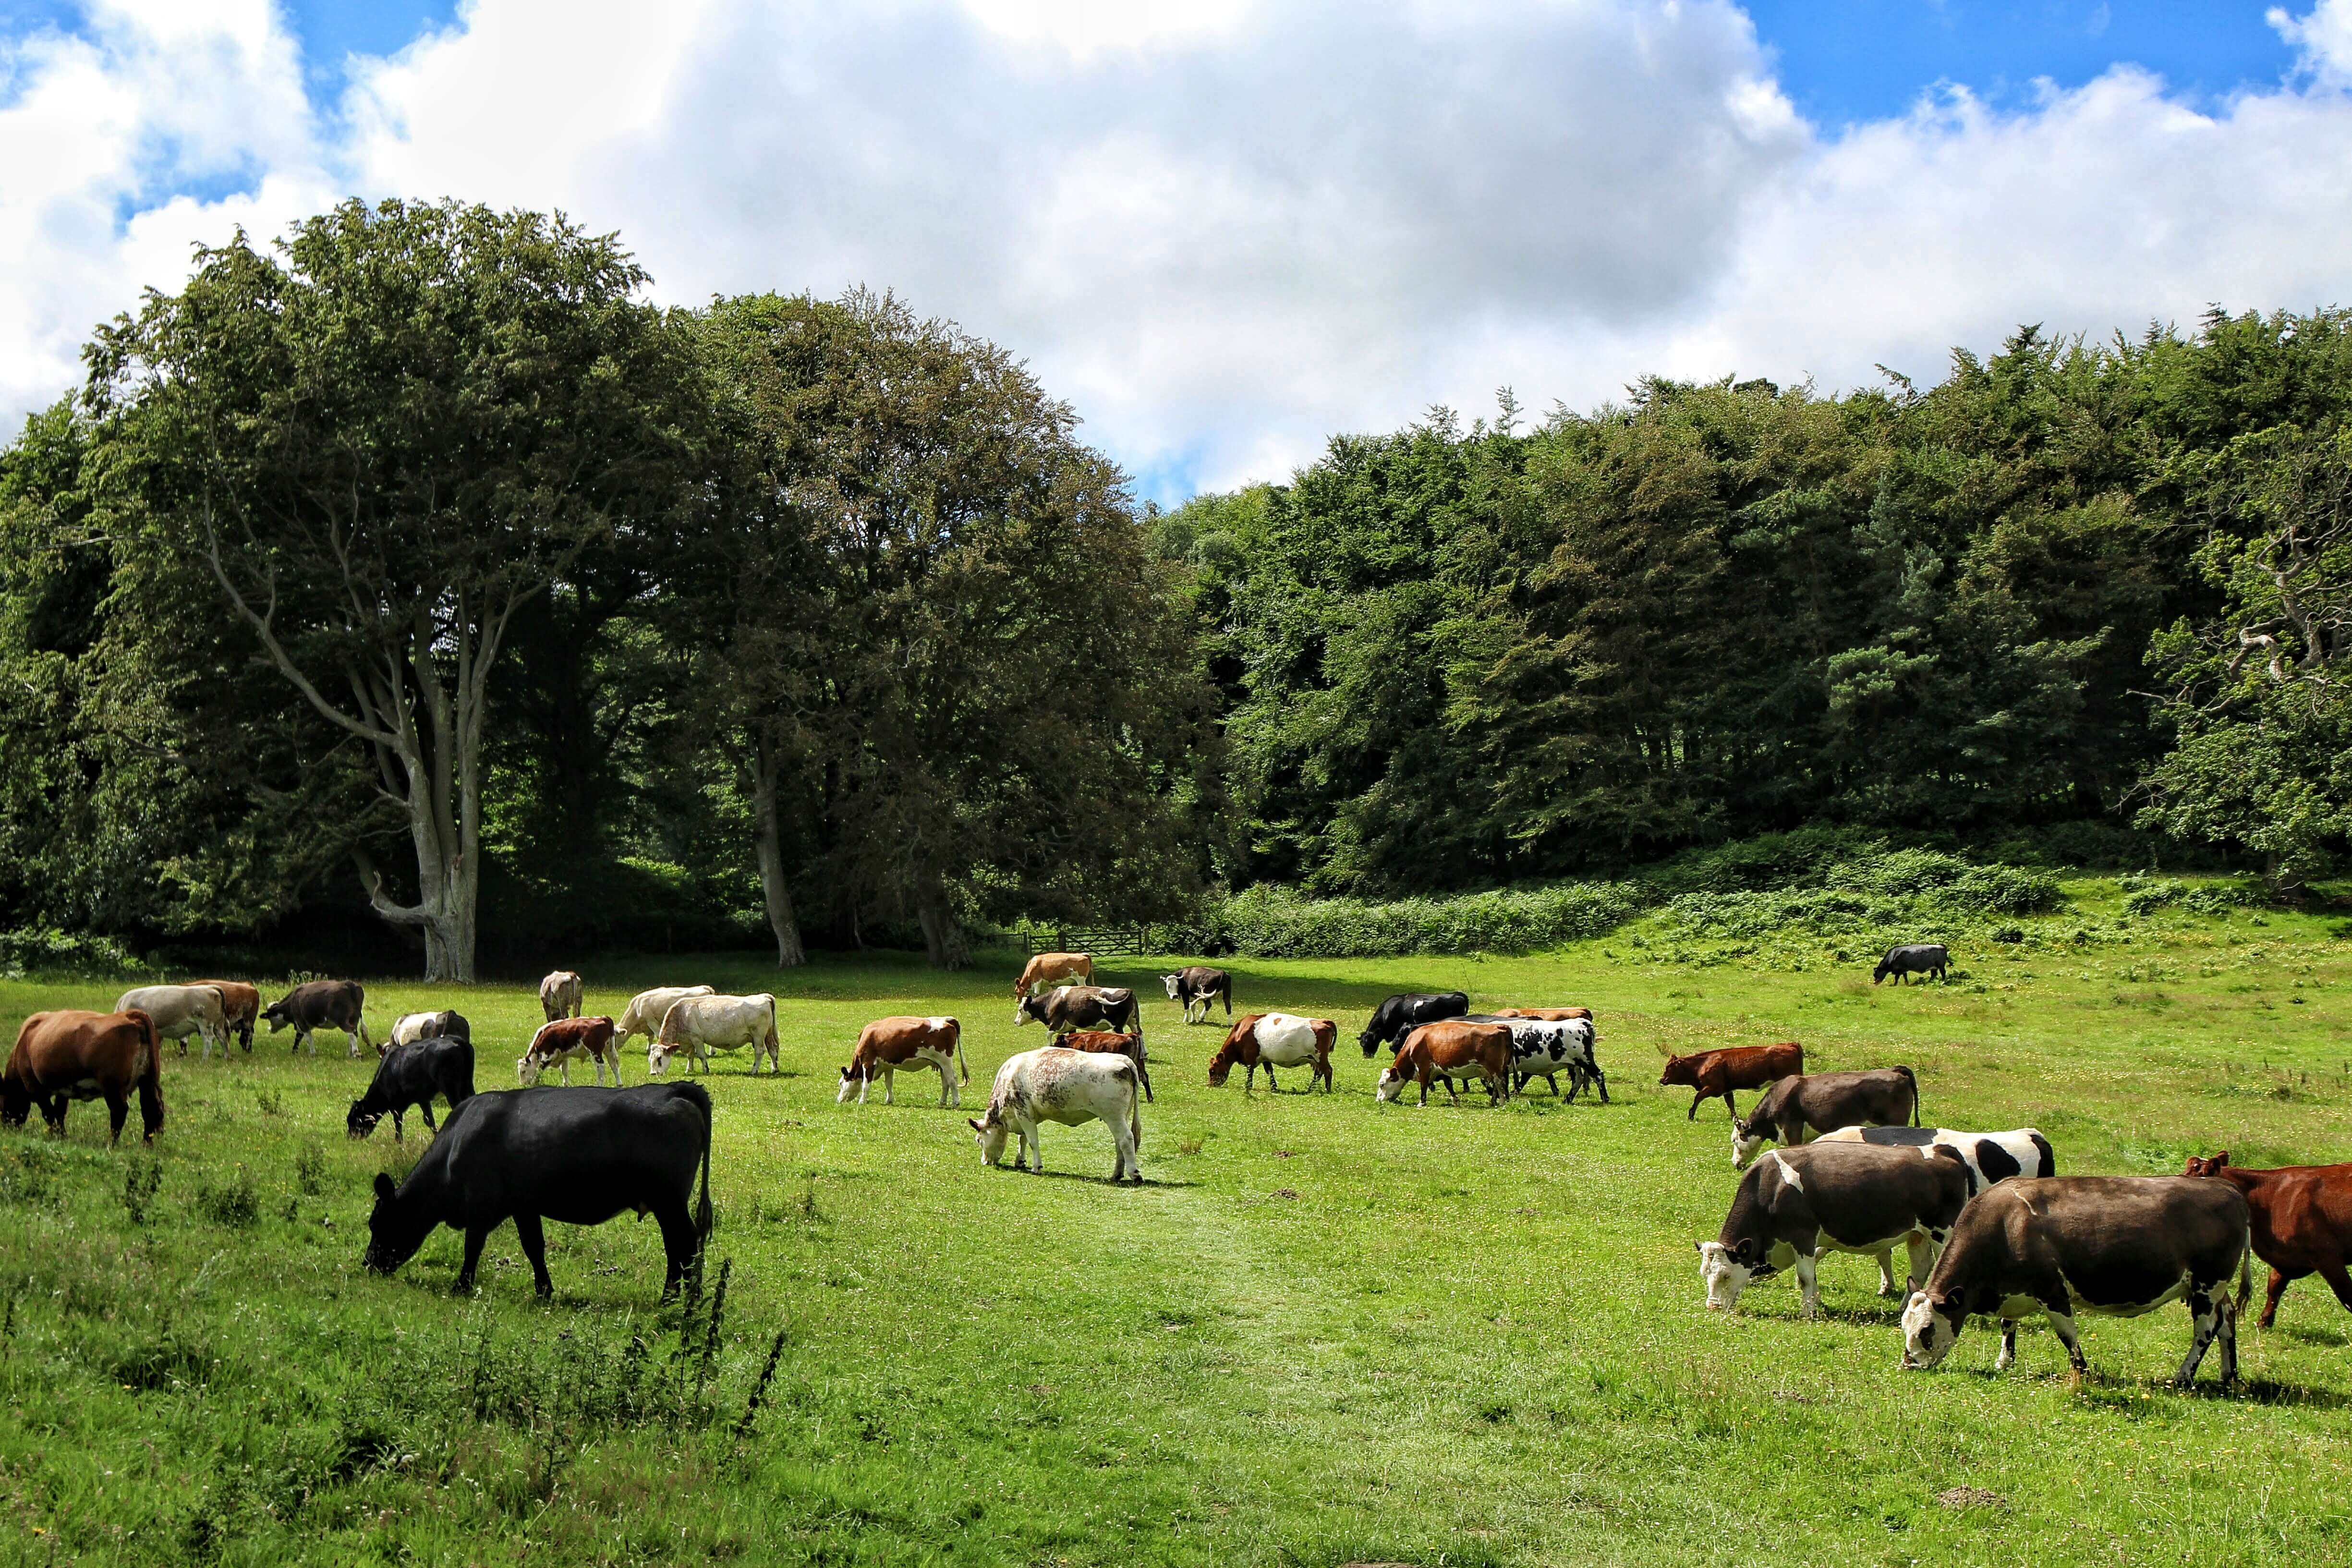 A green field with a herd of cows grazing